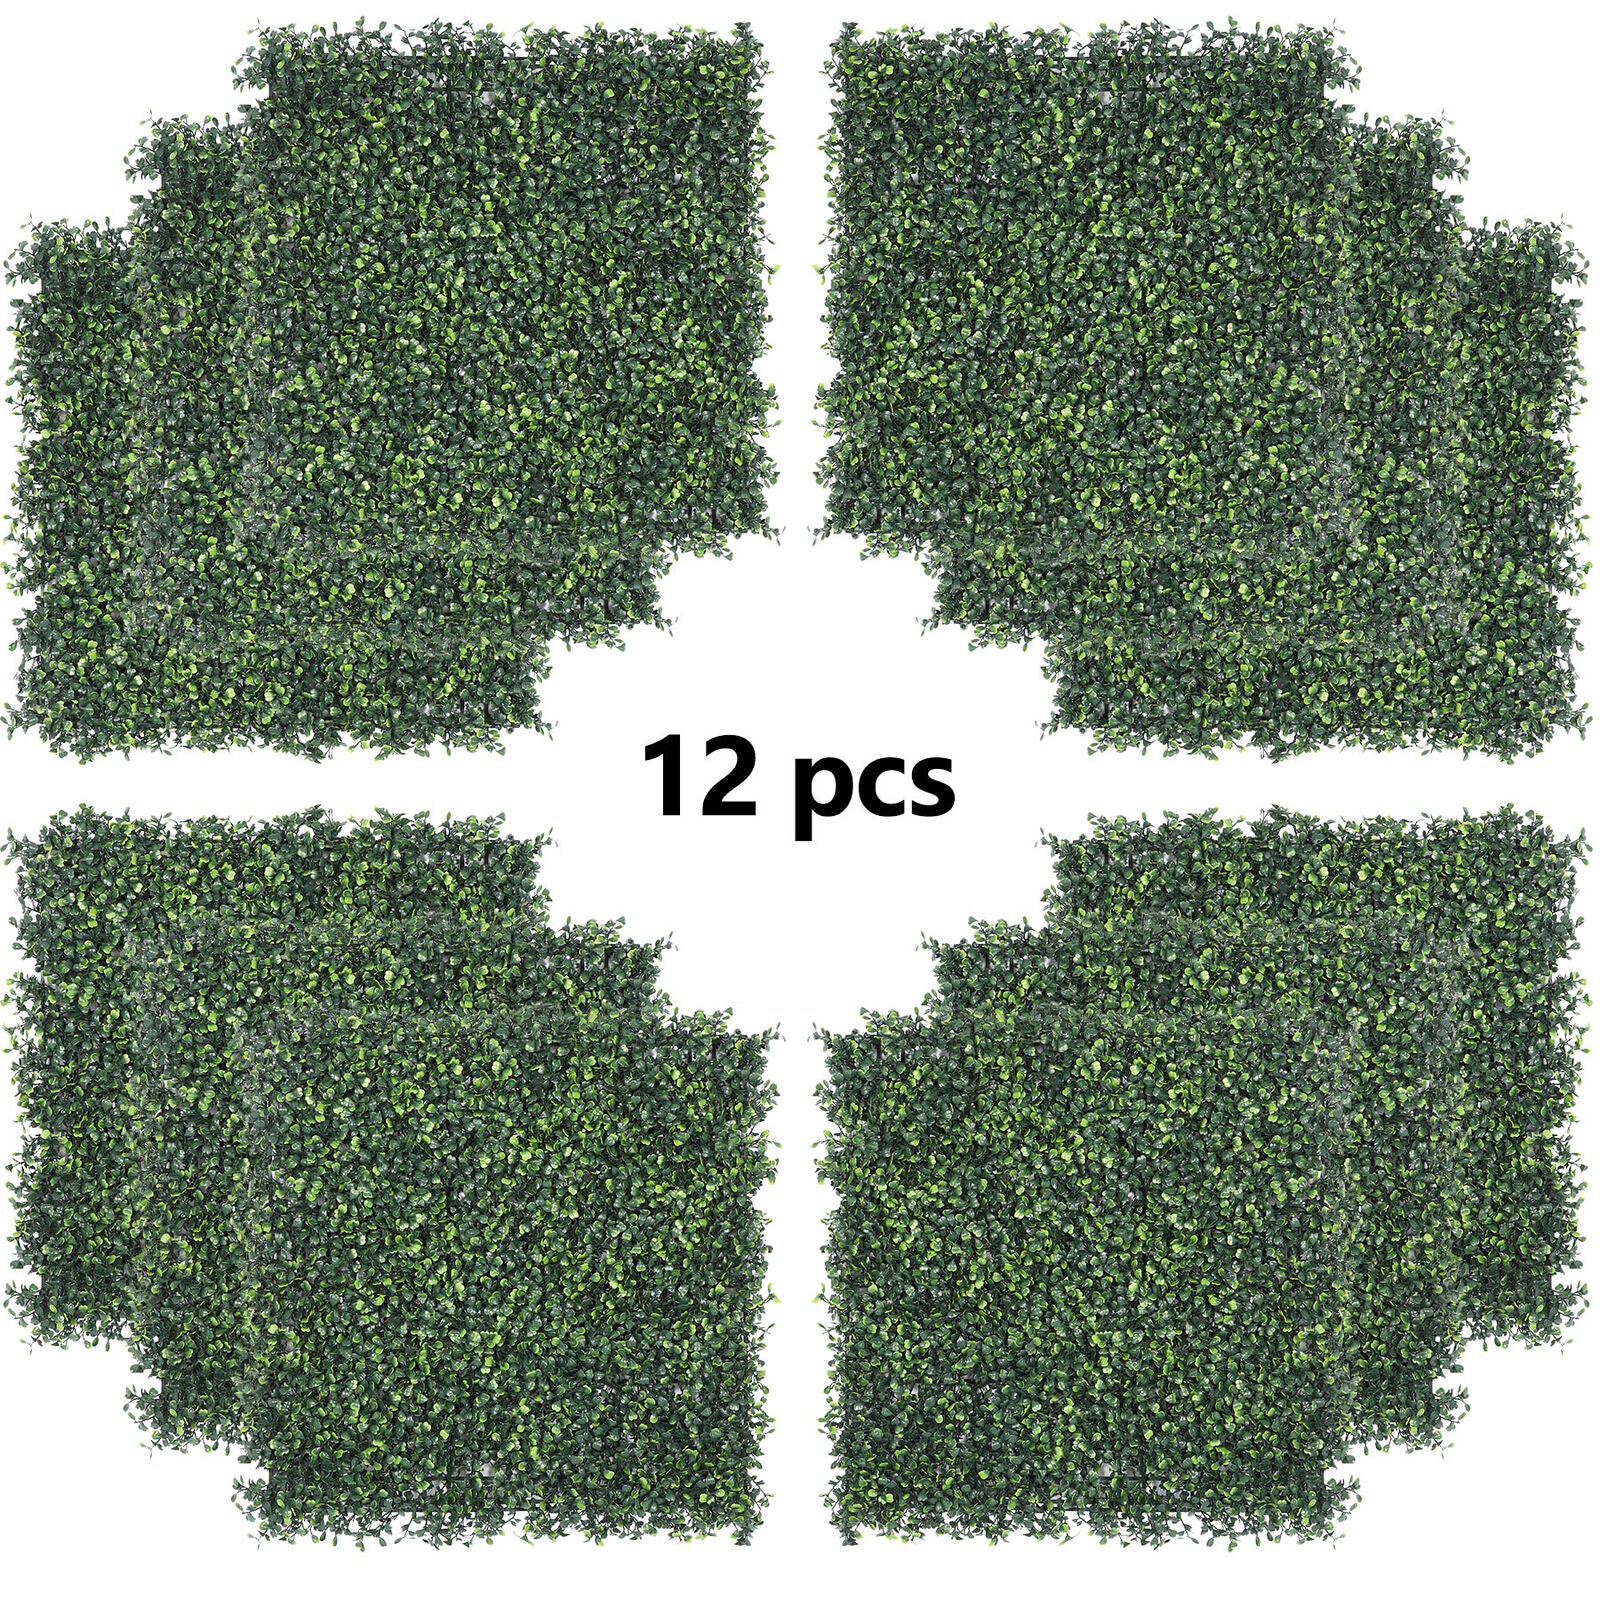 12pcs Artificial Boxwood Mat Wall Hedge Decor Privacy Fence Panels Grass 20x20